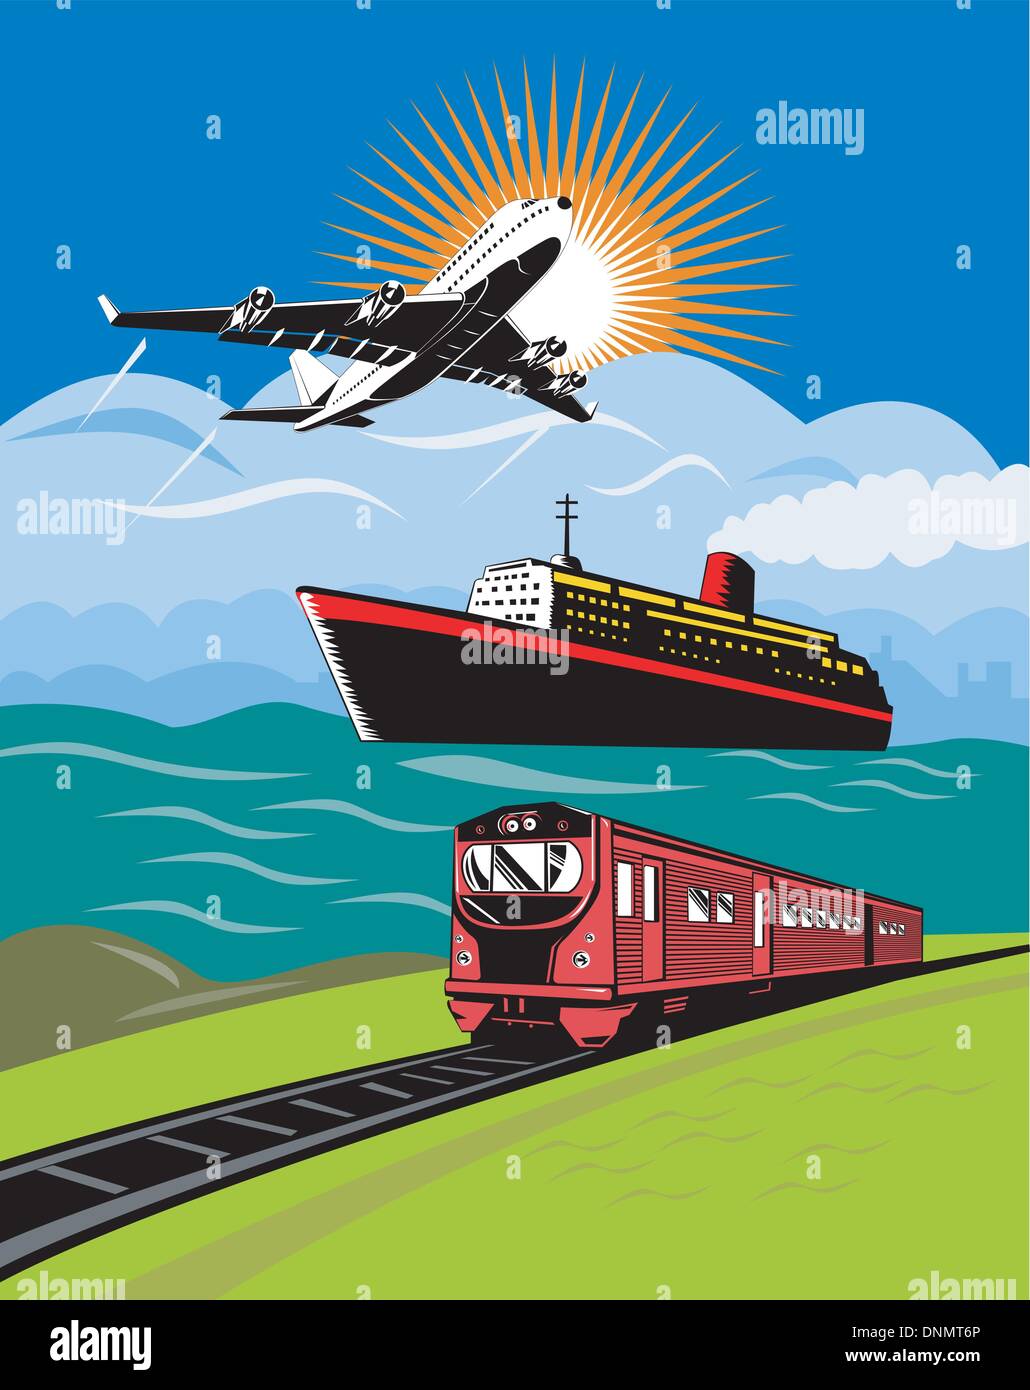 illustration of a commercial jet plane airliner on flight flying taking off with ship and train Stock Vector